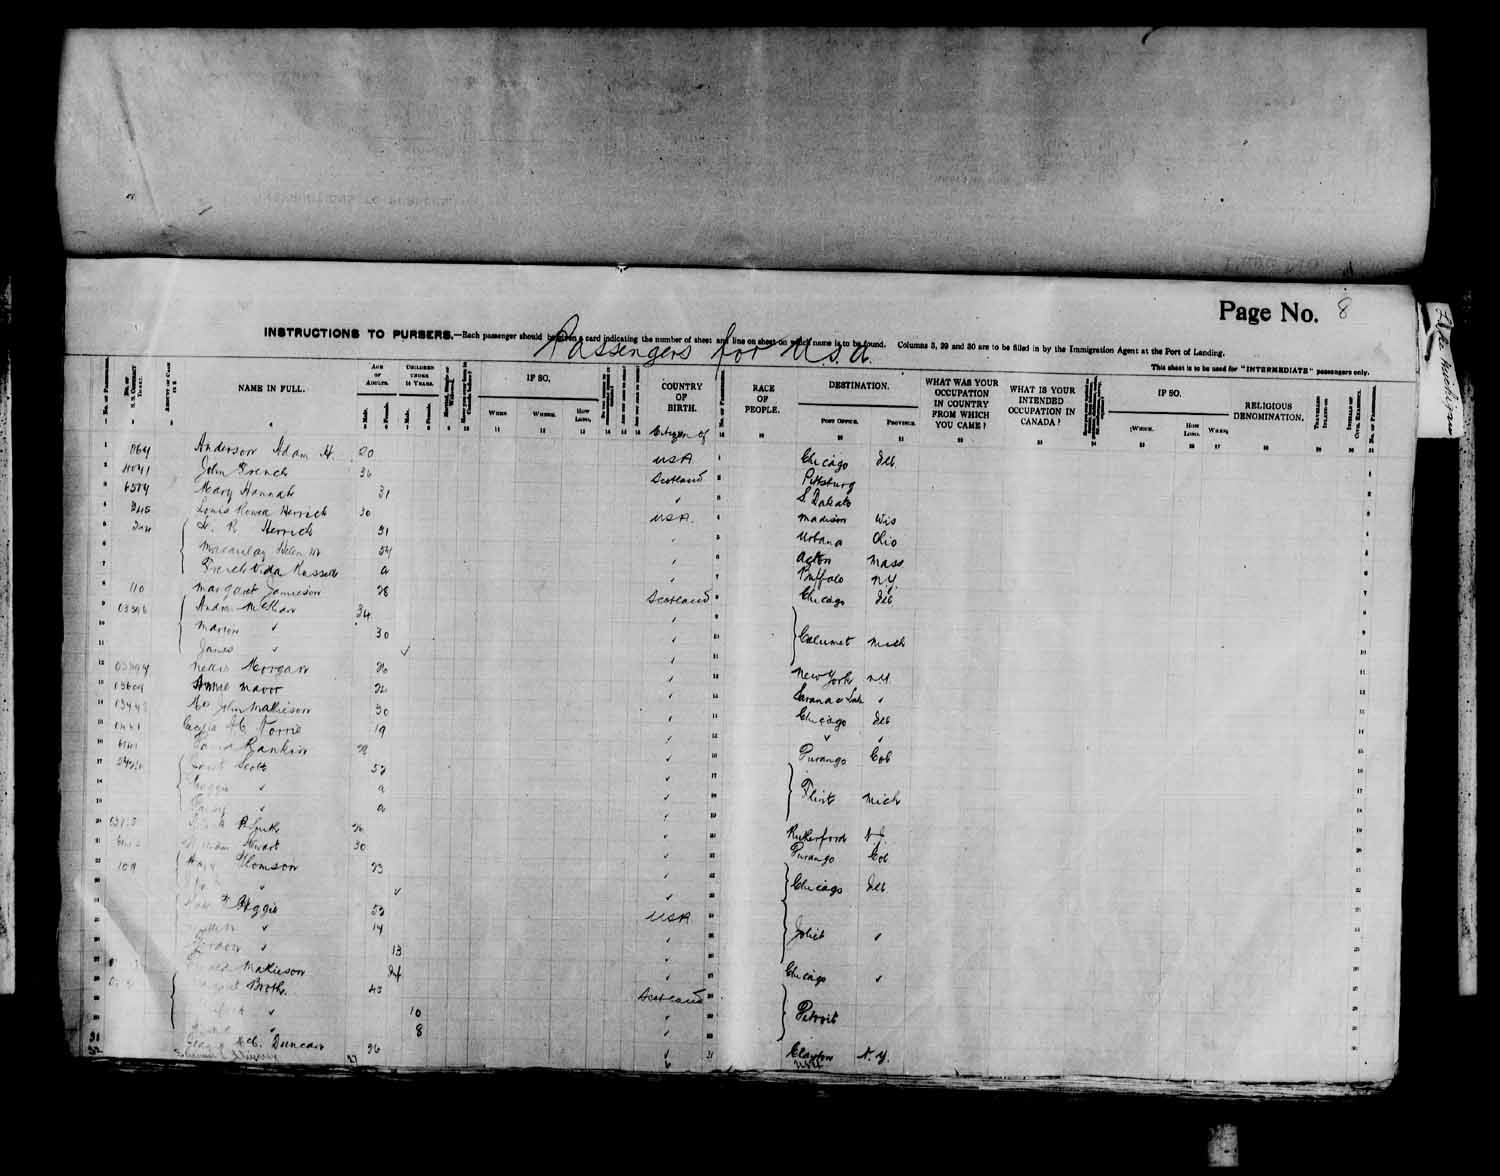 Digitized page of Passenger Lists for Image No.: e003566519